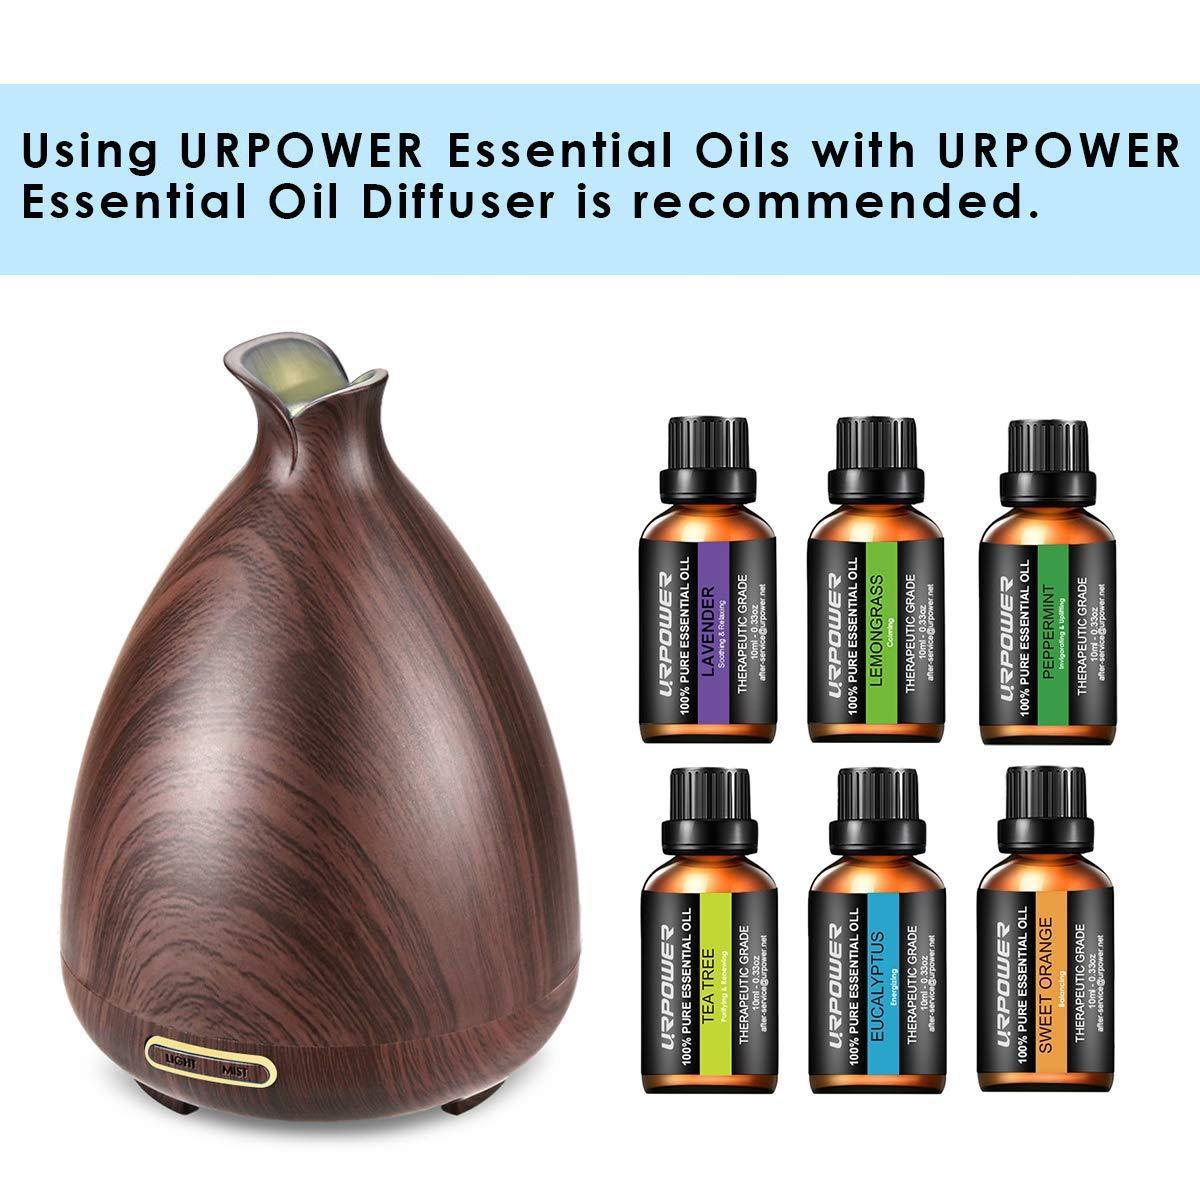 URPOWER Essential Oils Upgraded 6 Aromatherapy Essential Oil